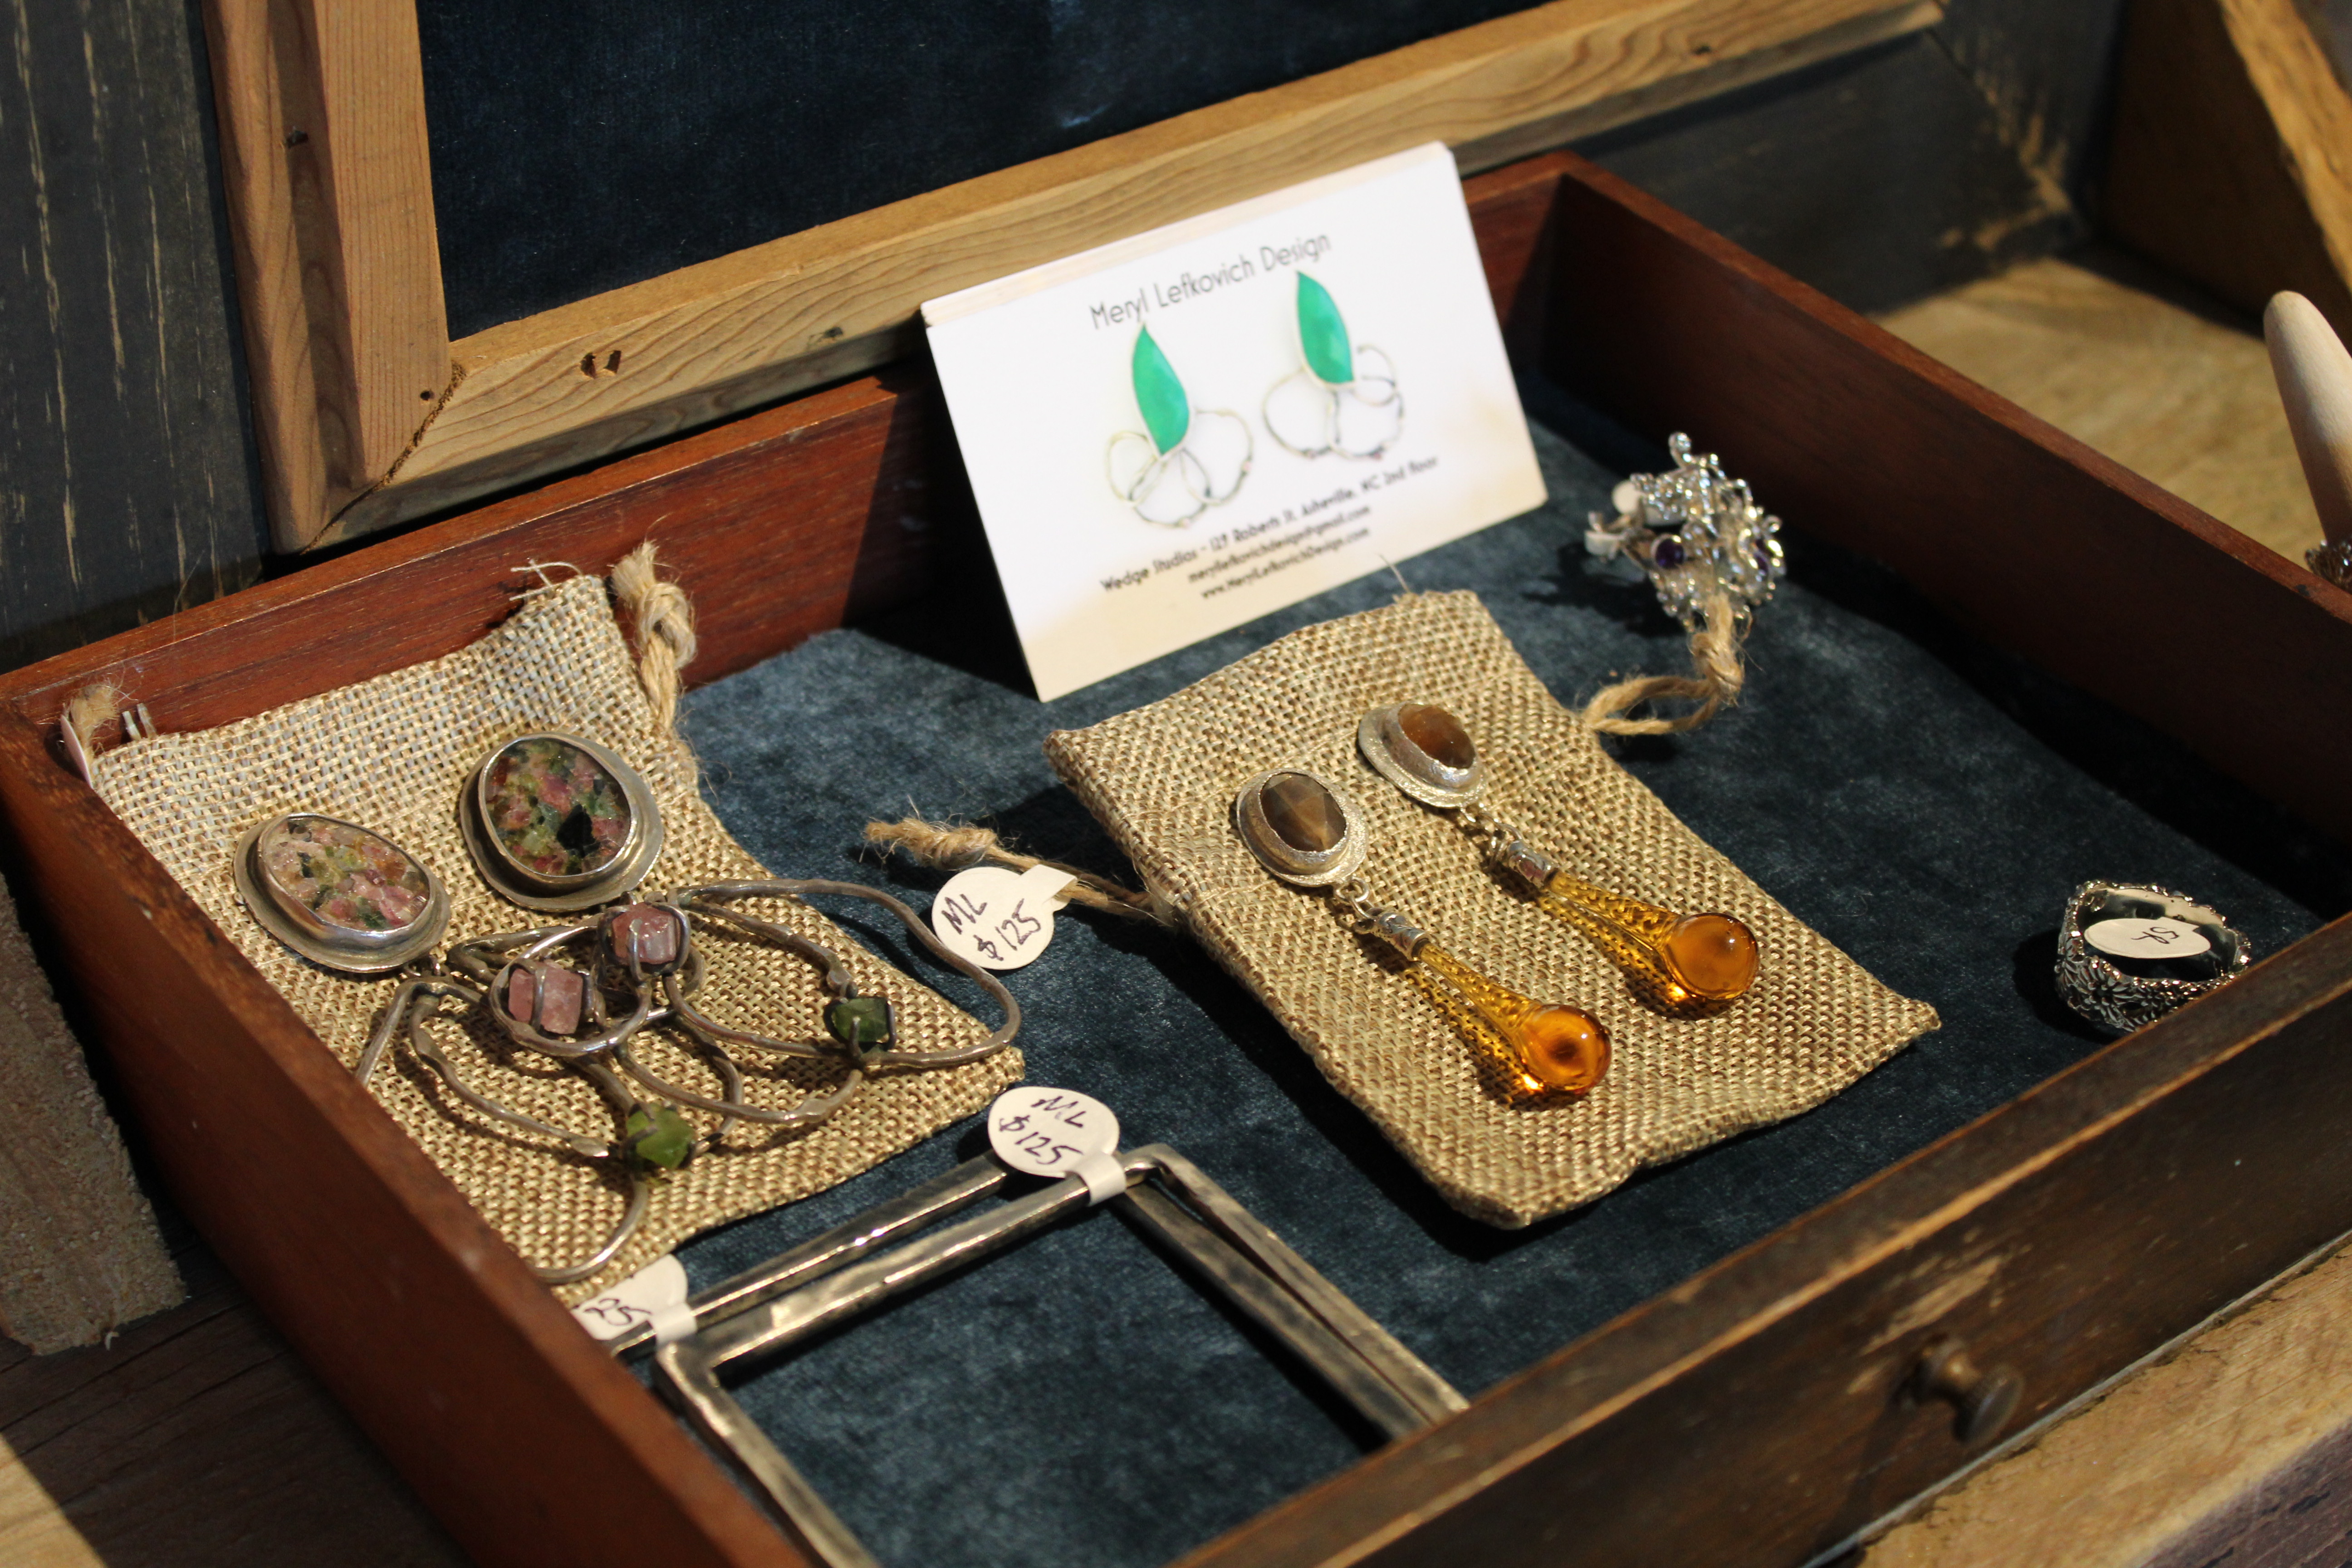 Sweetgrass Artisan Mercantile sells an array of original arts and crafts from local artisans including paintings, jewelry and wood-work. Pictured here are jewelry pieces from Meryl Lefkovich Design. (MNJ photo/Juliana Walker)